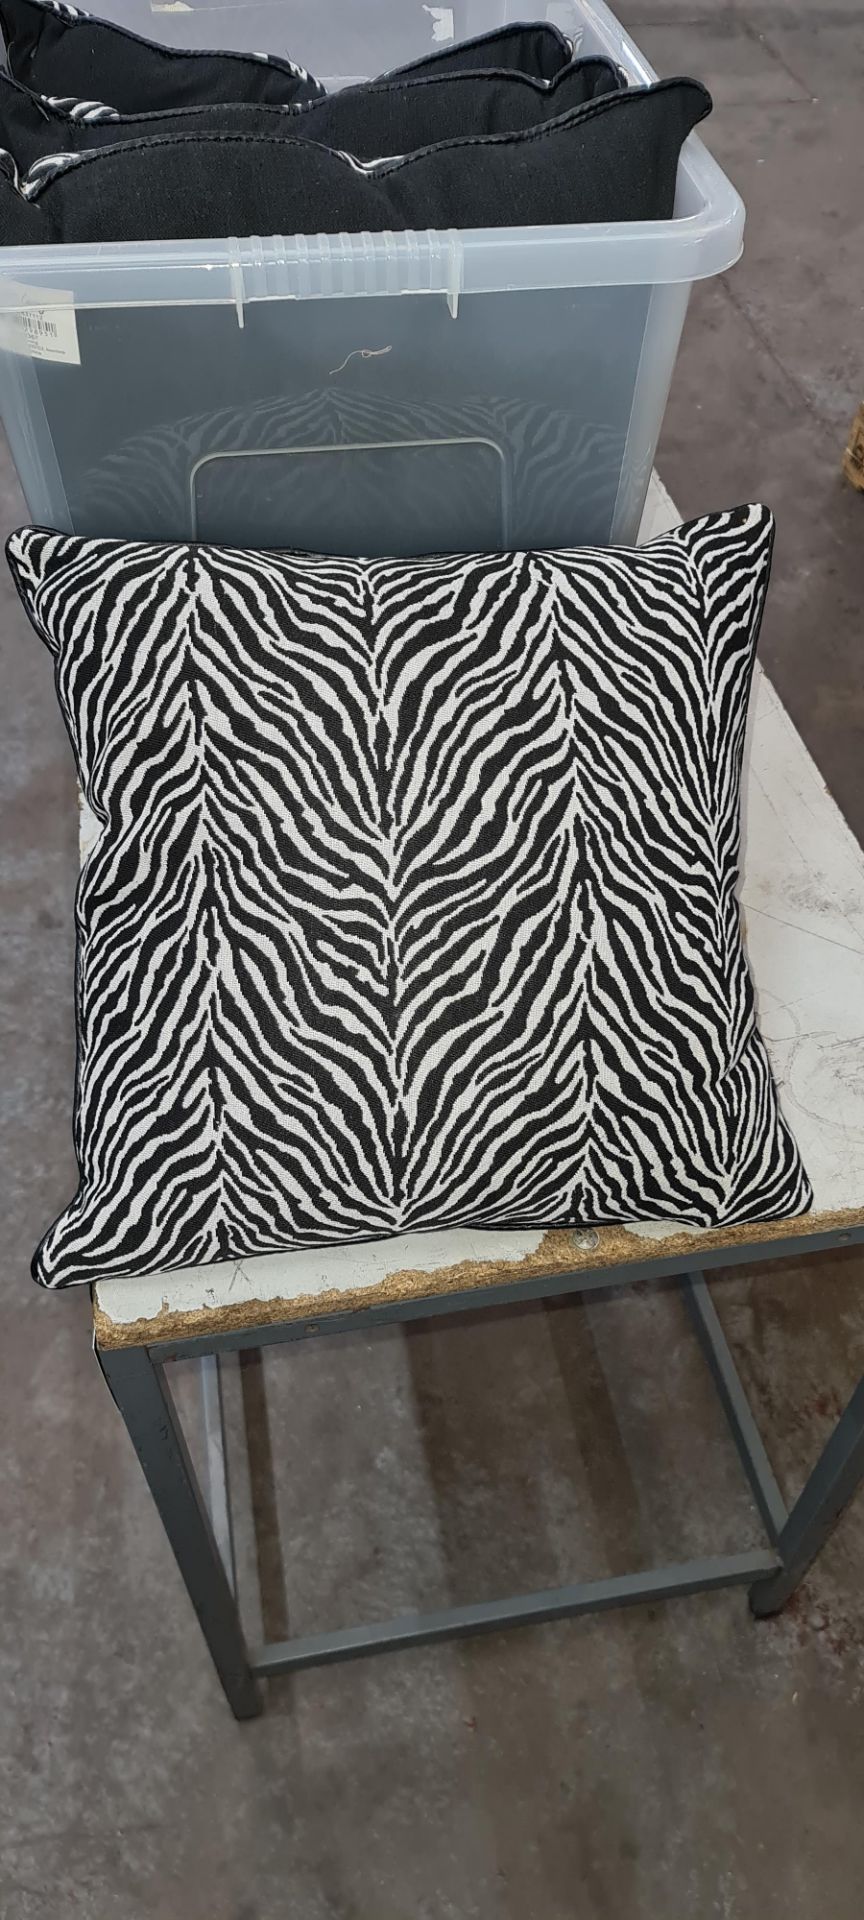 Set of 4 square cushions with black & white striped pattern, priced at £19.99 each - crate excluded - Image 2 of 4